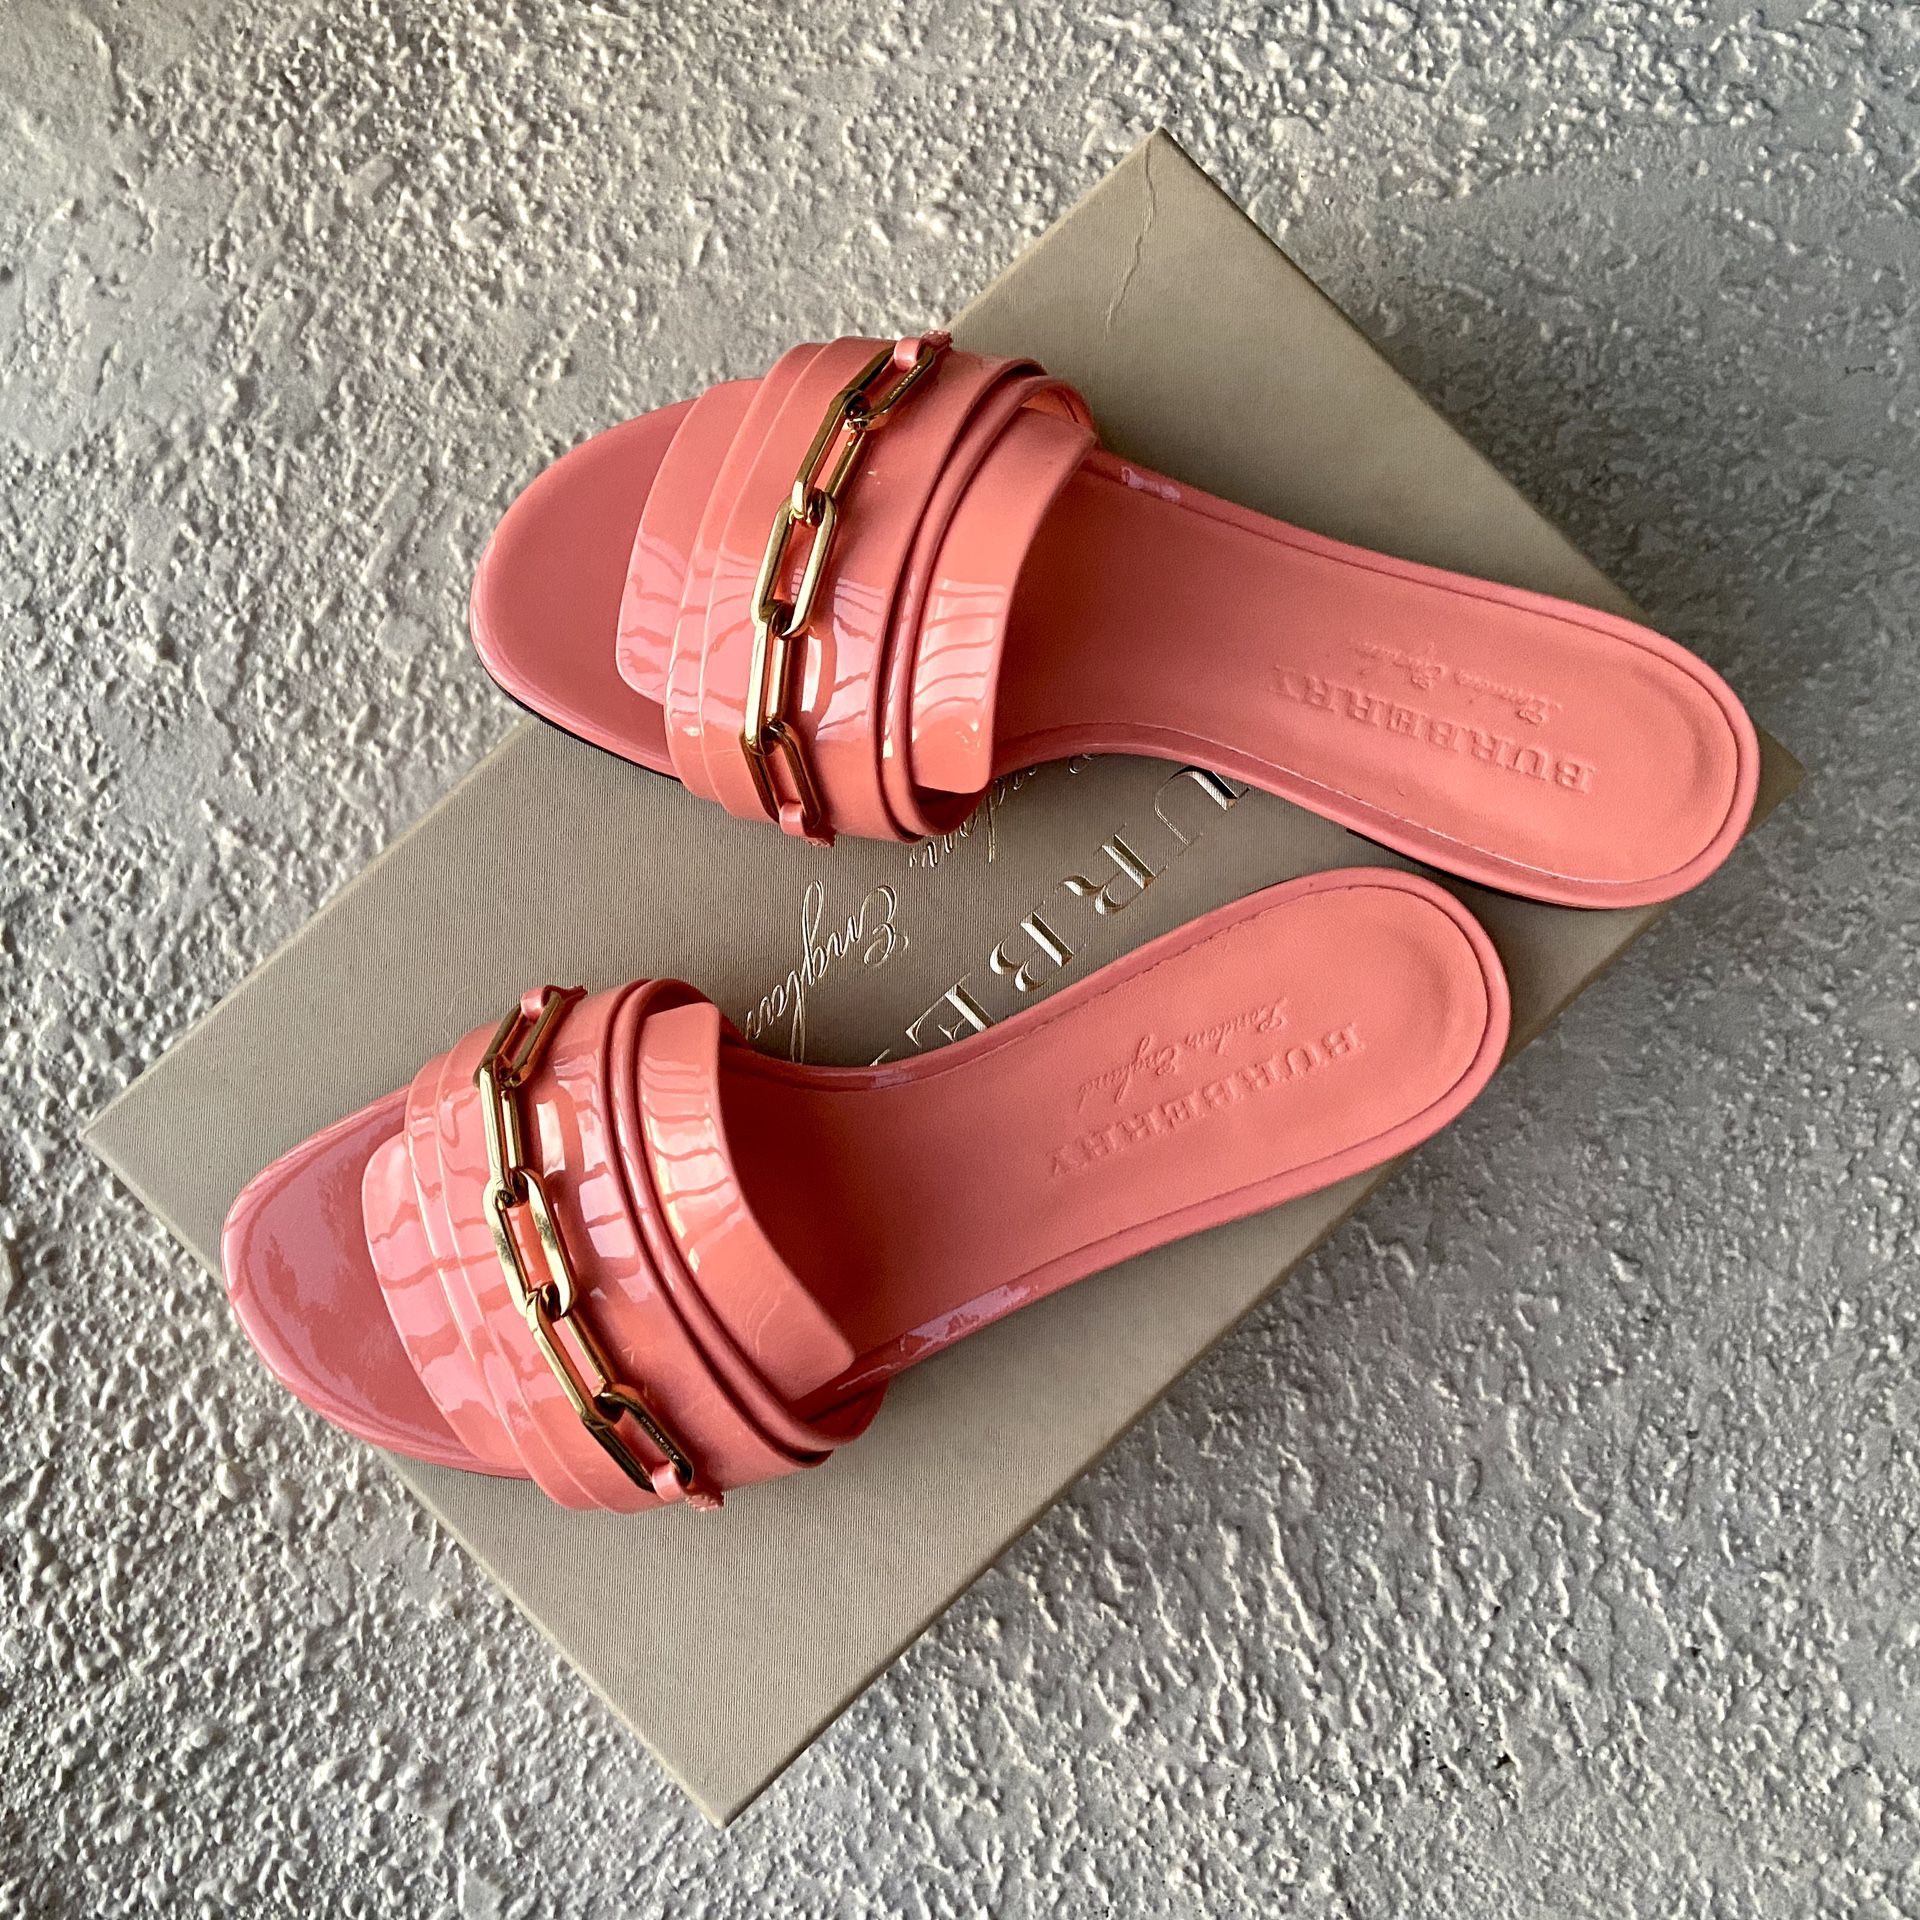 Burberry Pink Sandals Flats Shoes 38 BRAND NEW!!